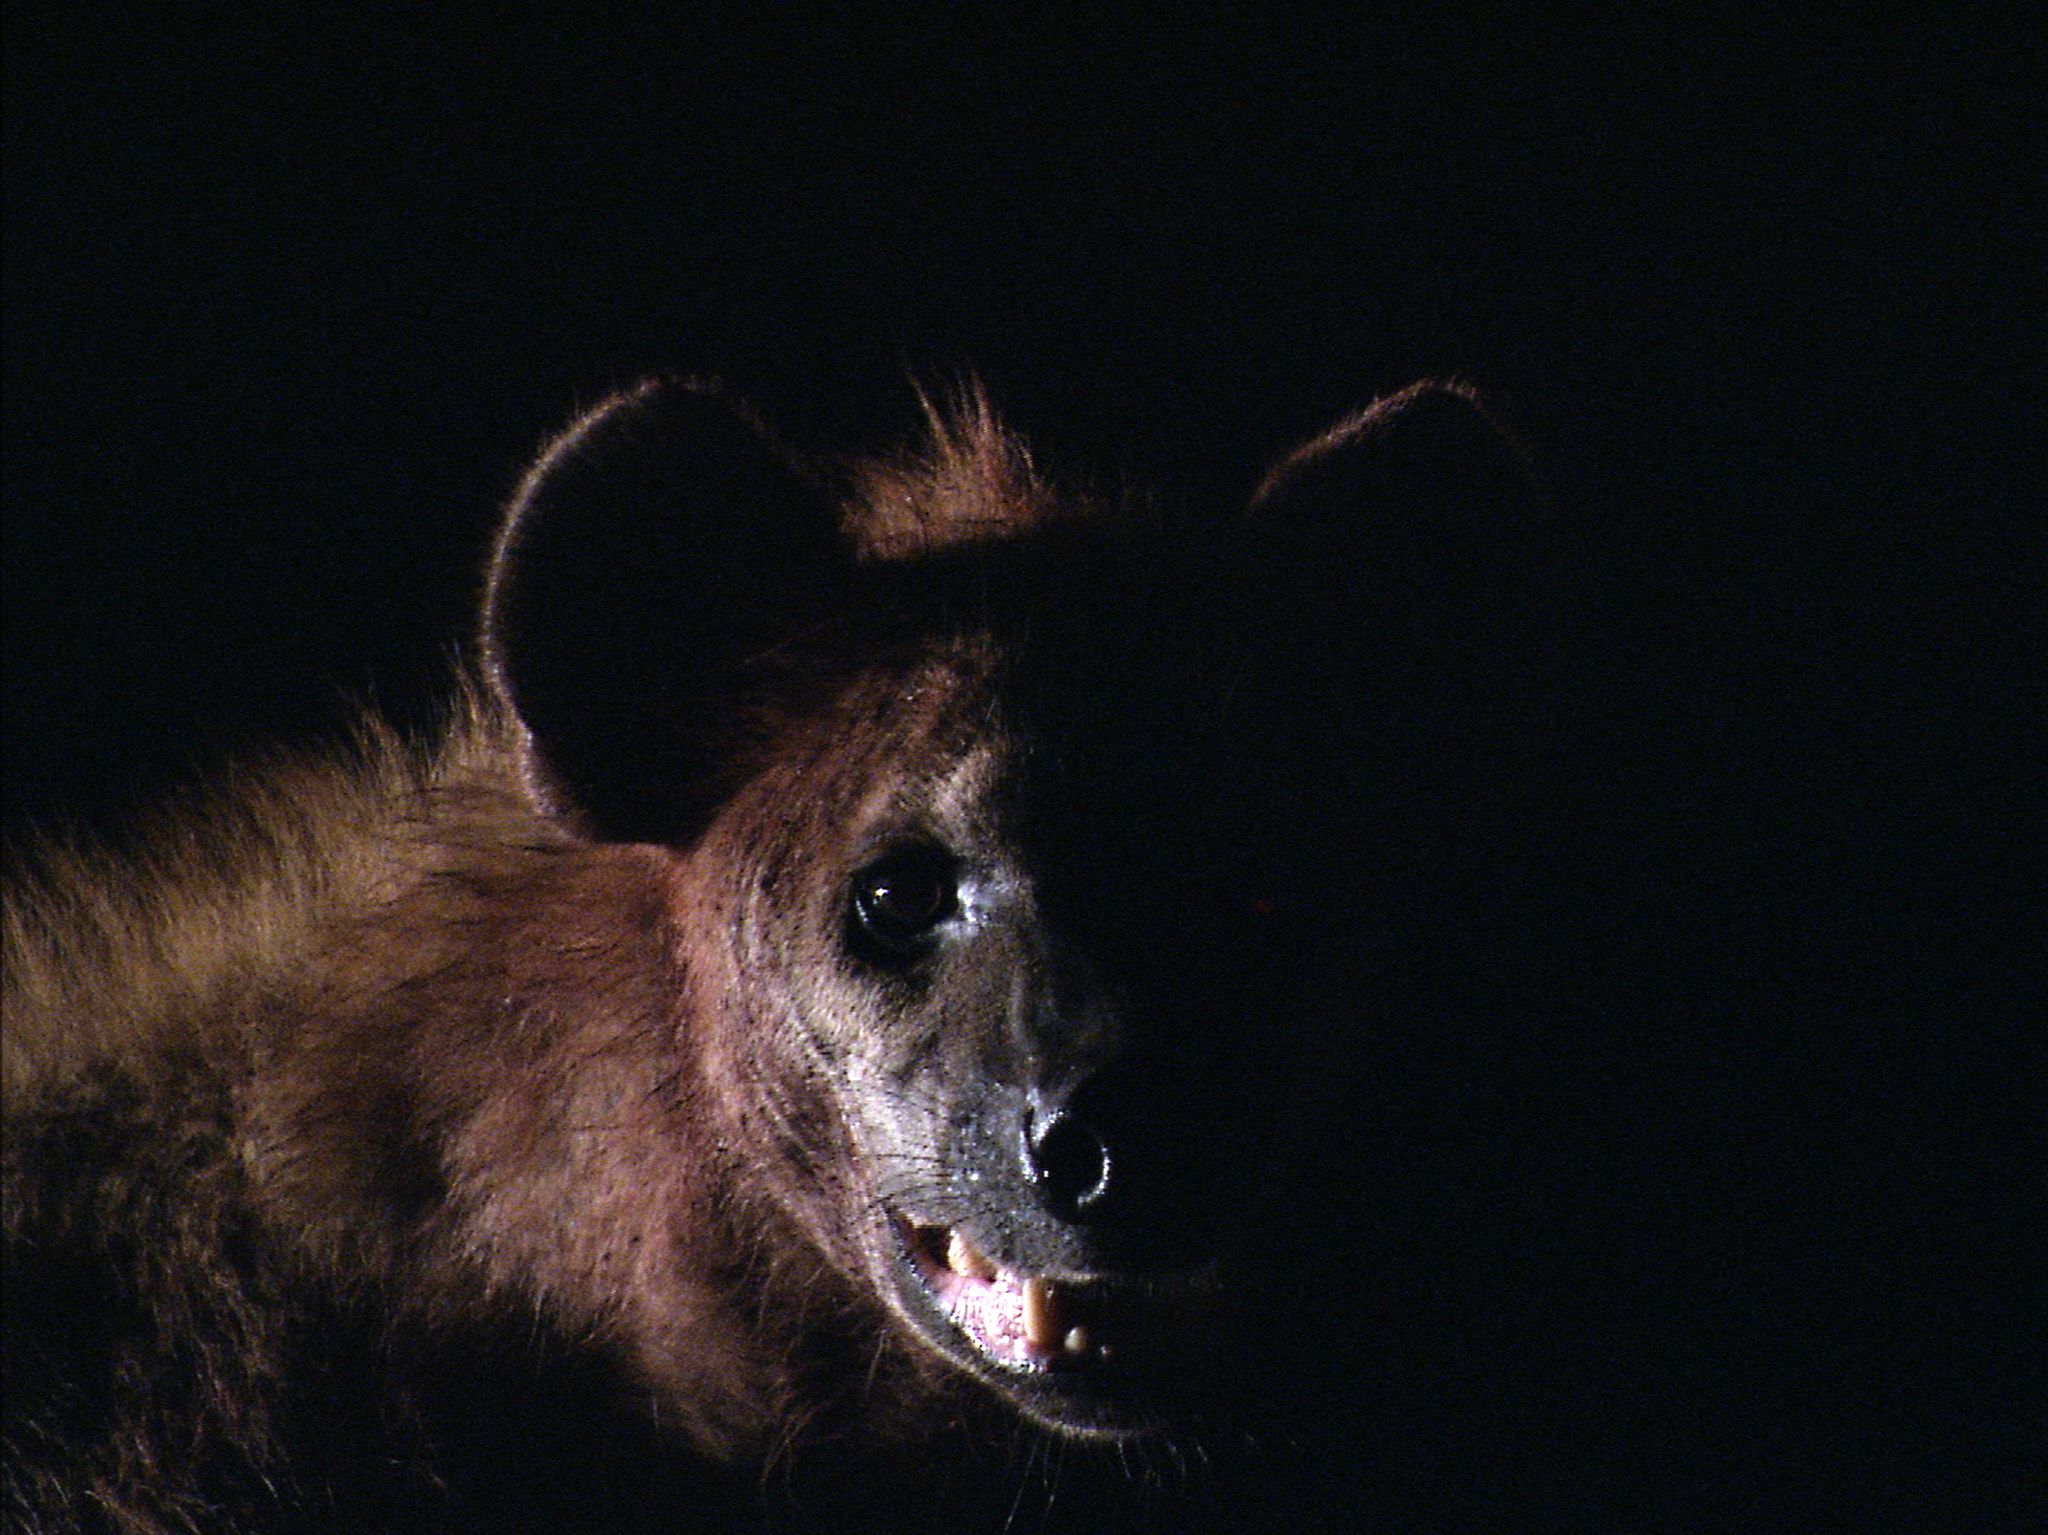 Liuwa Plain National Park, Zambia:  Close up of hyena at night.  This image is from Africa's... [Photo of the day - April 2020]